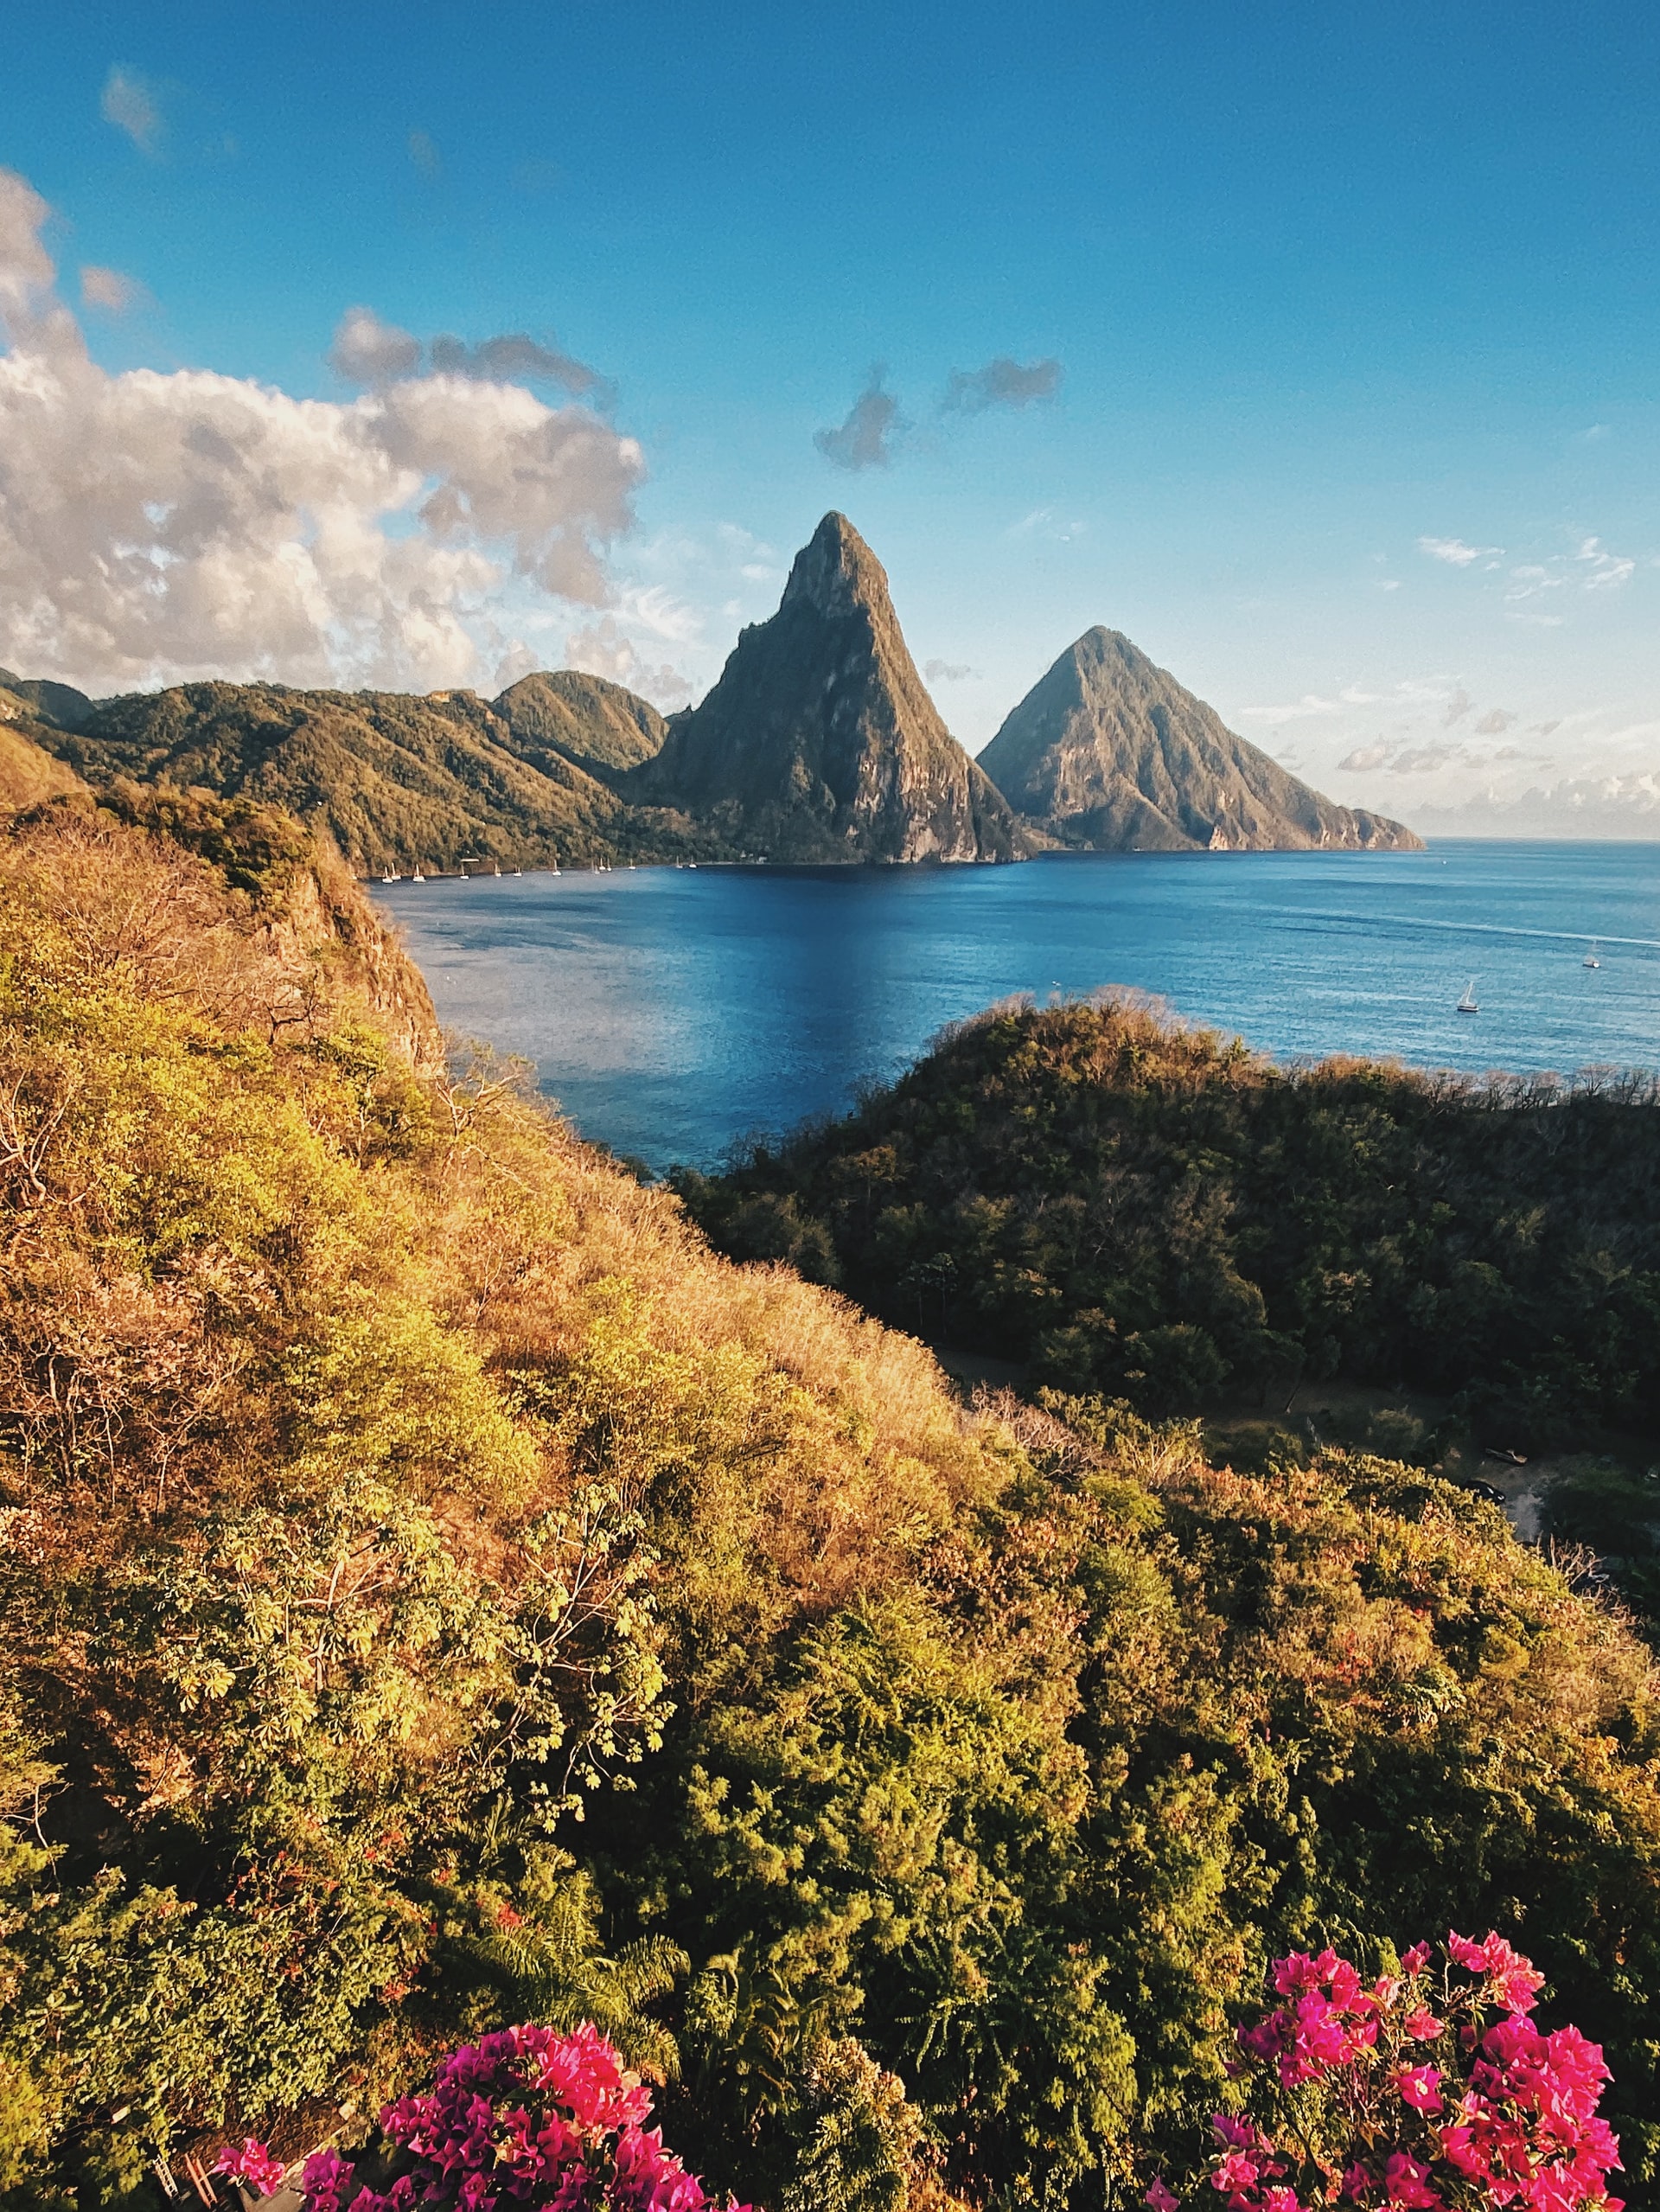 Amazing mountains in Saint Lucia